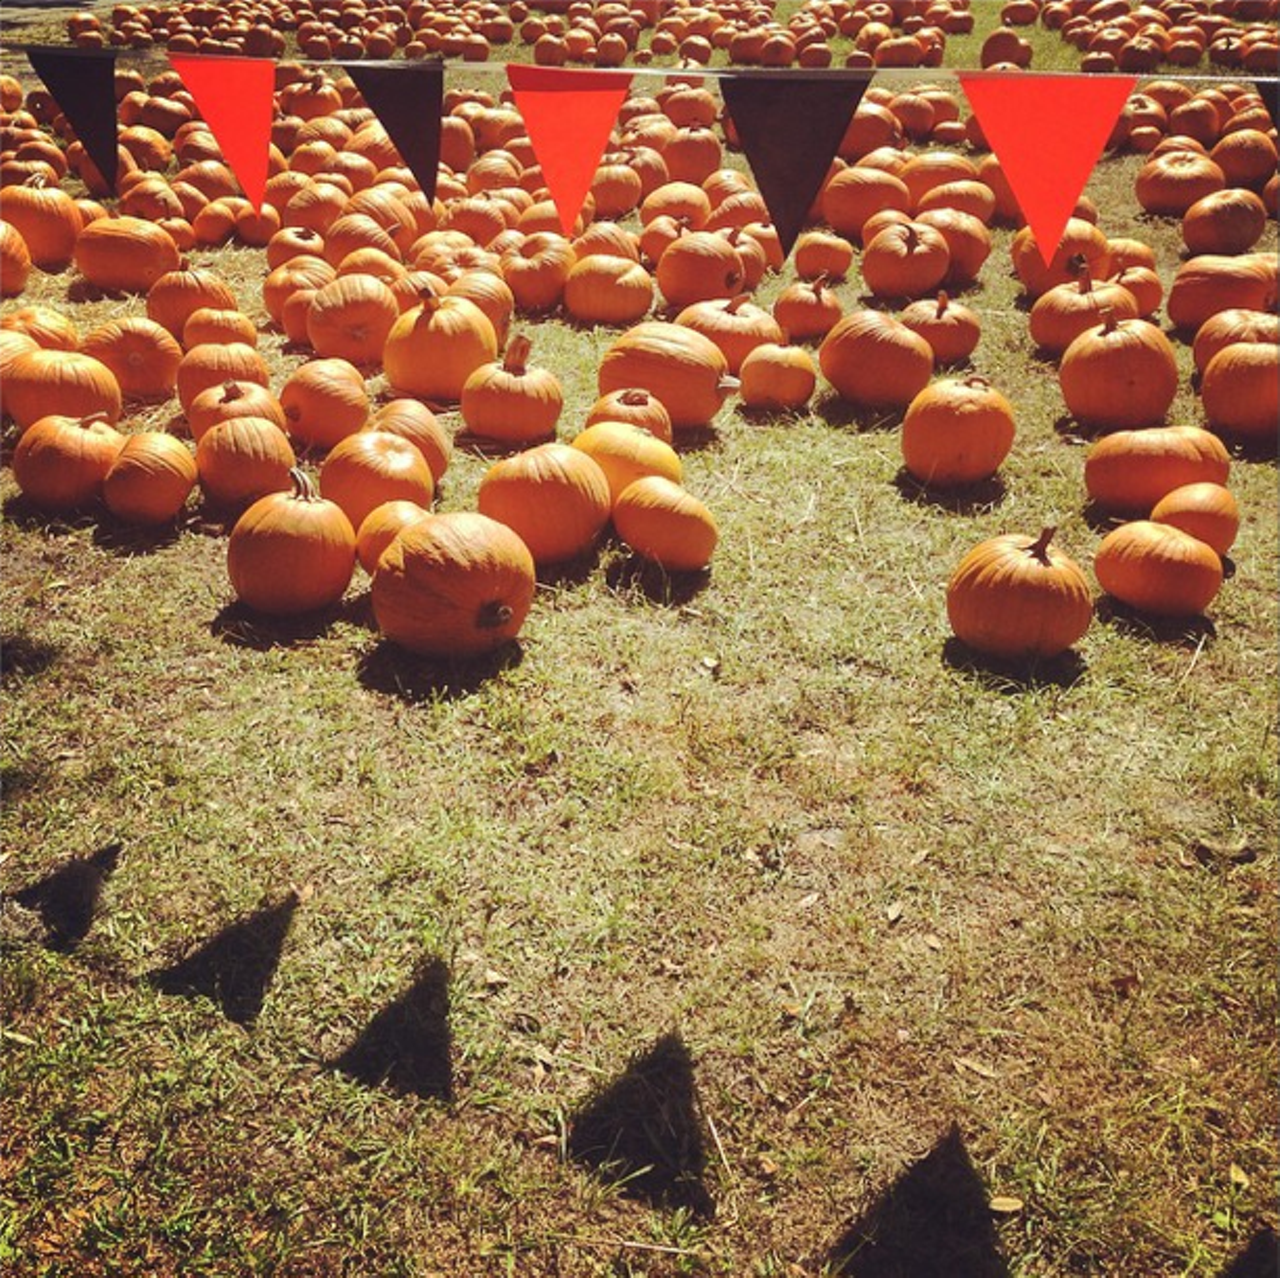 Pumpkin patch on Saturday afternoon